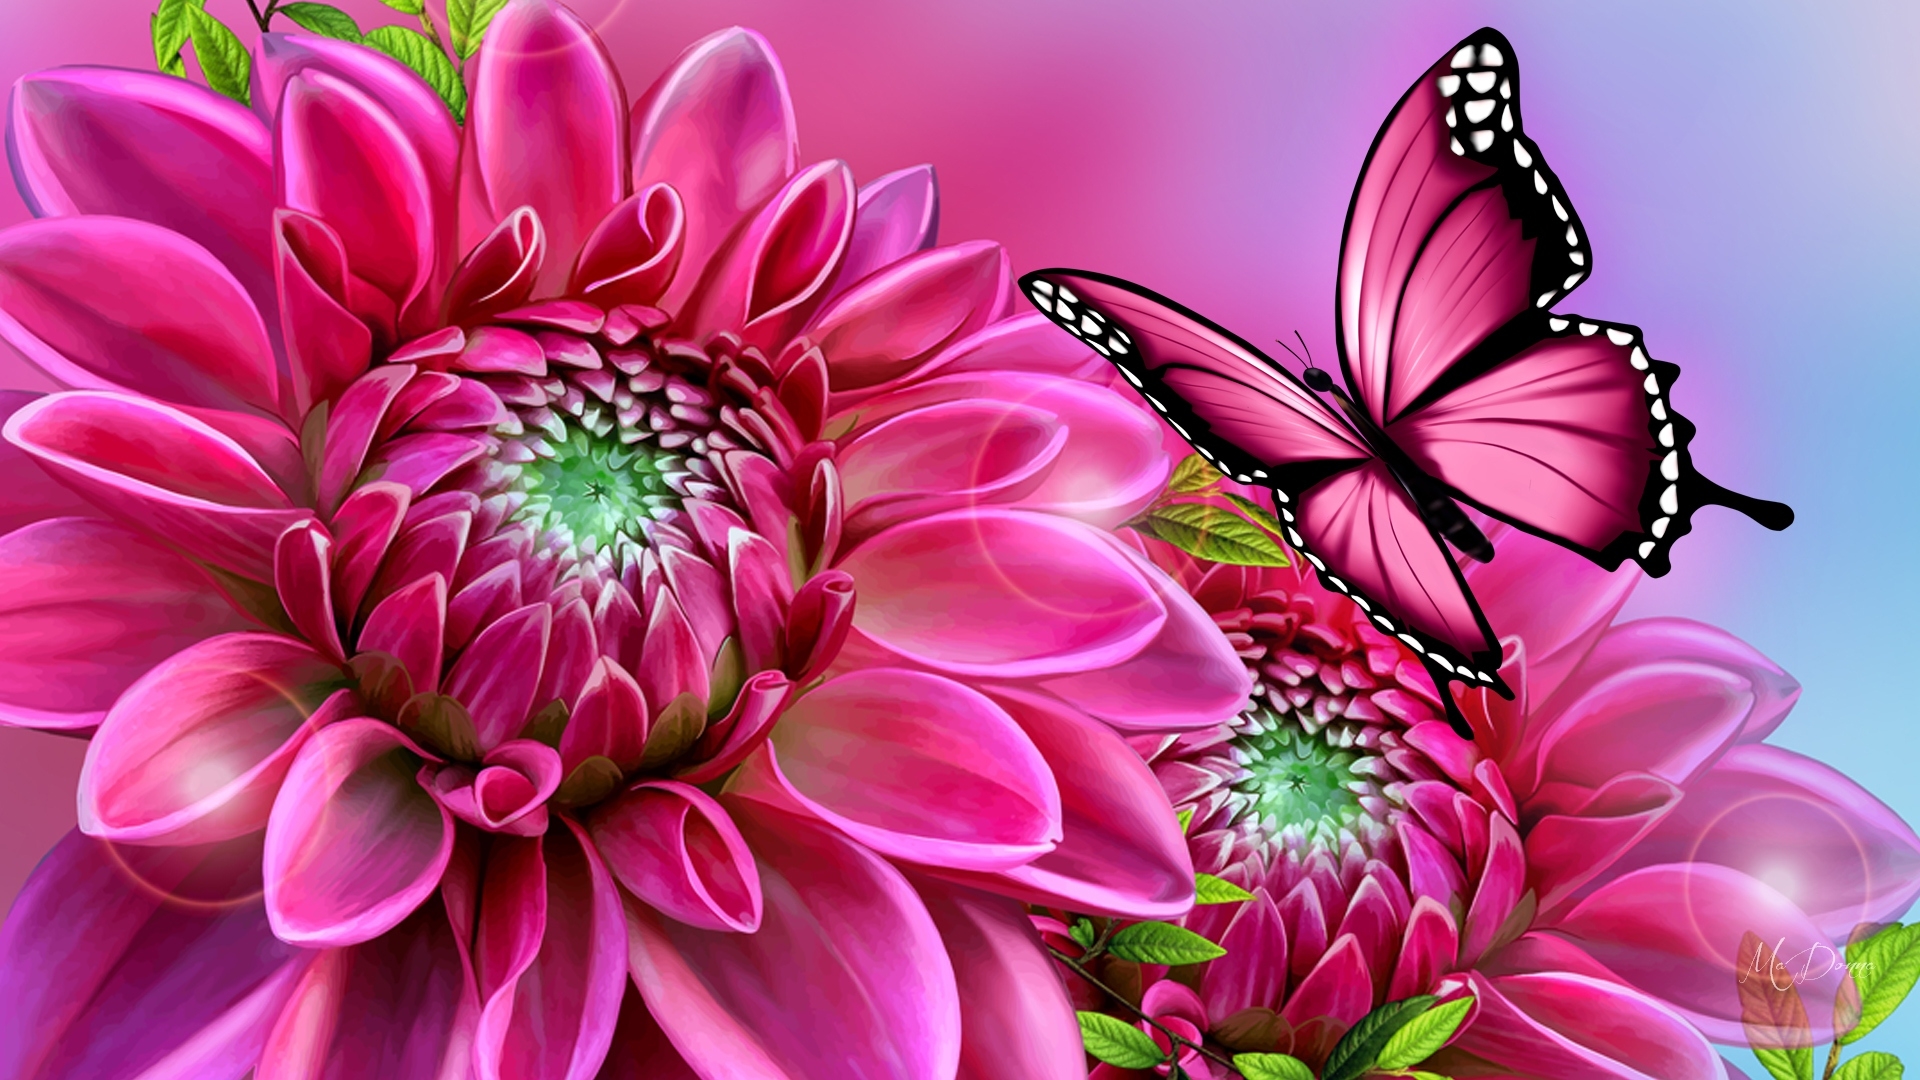 Dahlia and Butterfly by MaDonna